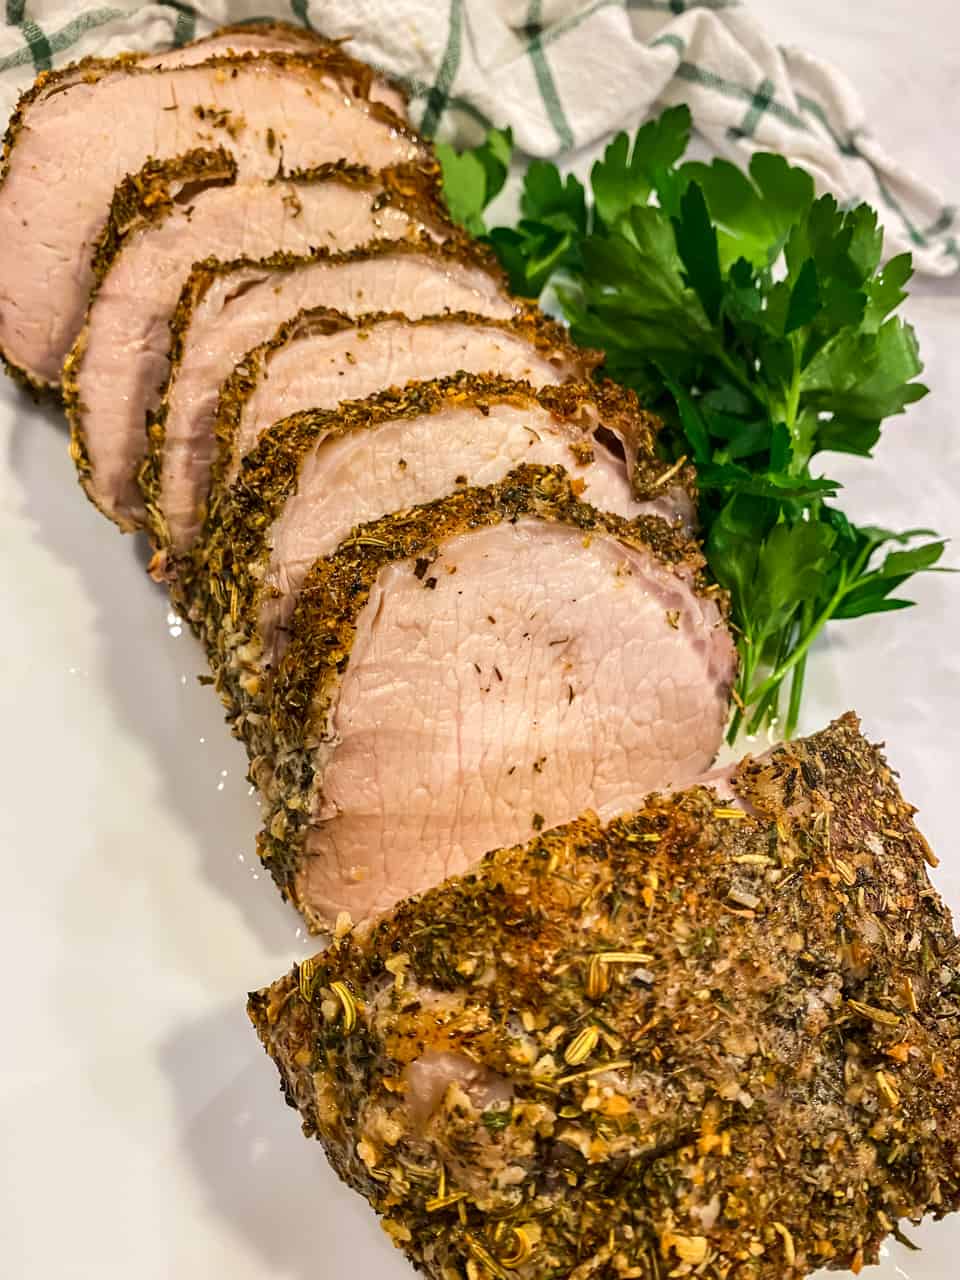 A sliced porchetta with greens on side